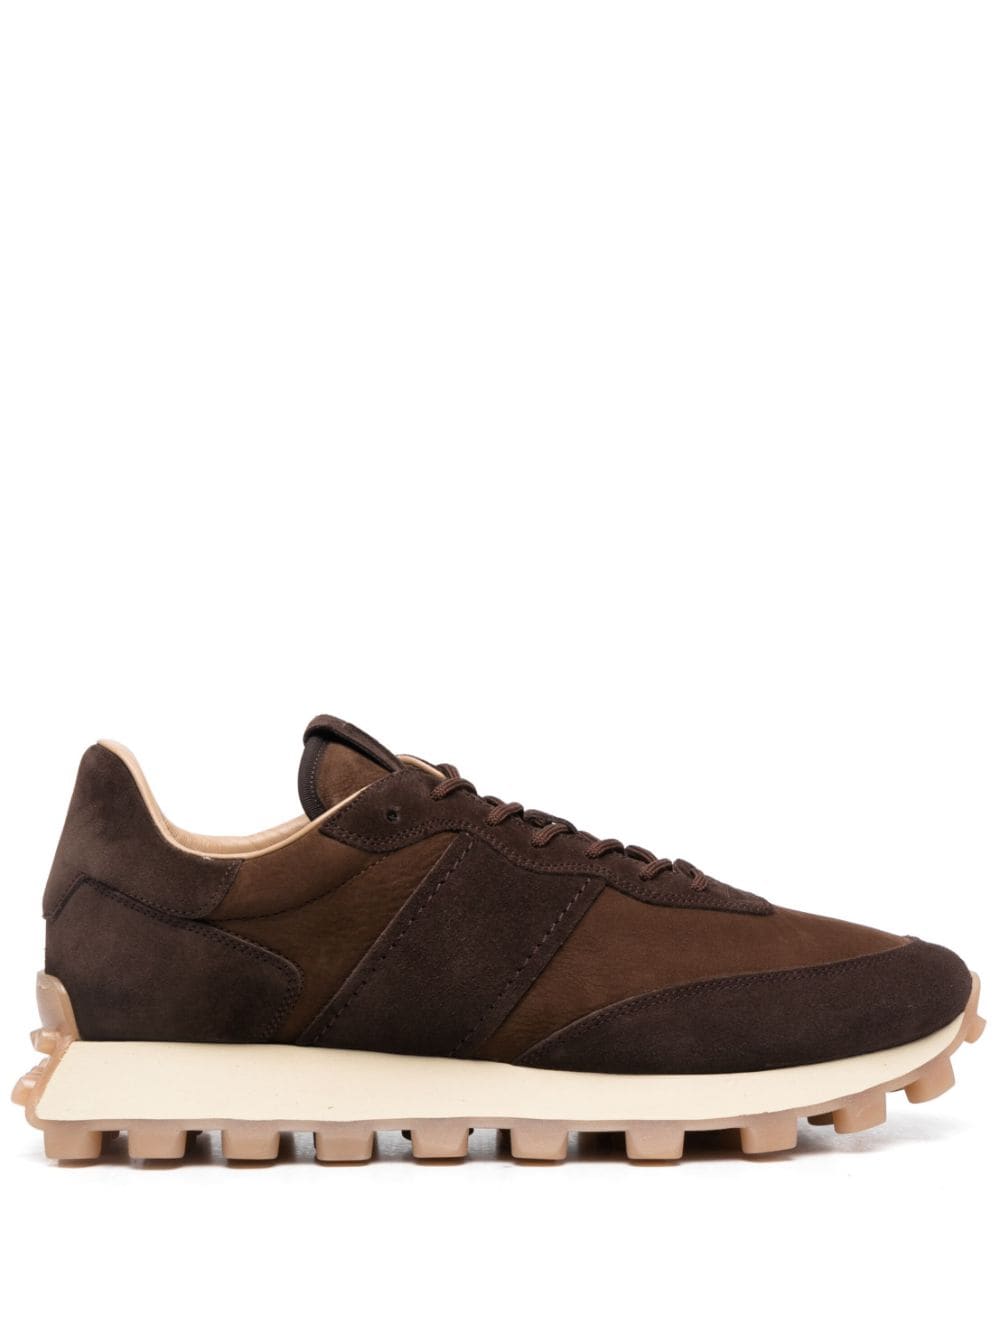 TOD'S Brown Panelled Lace-Up Leather Sneakers for Men